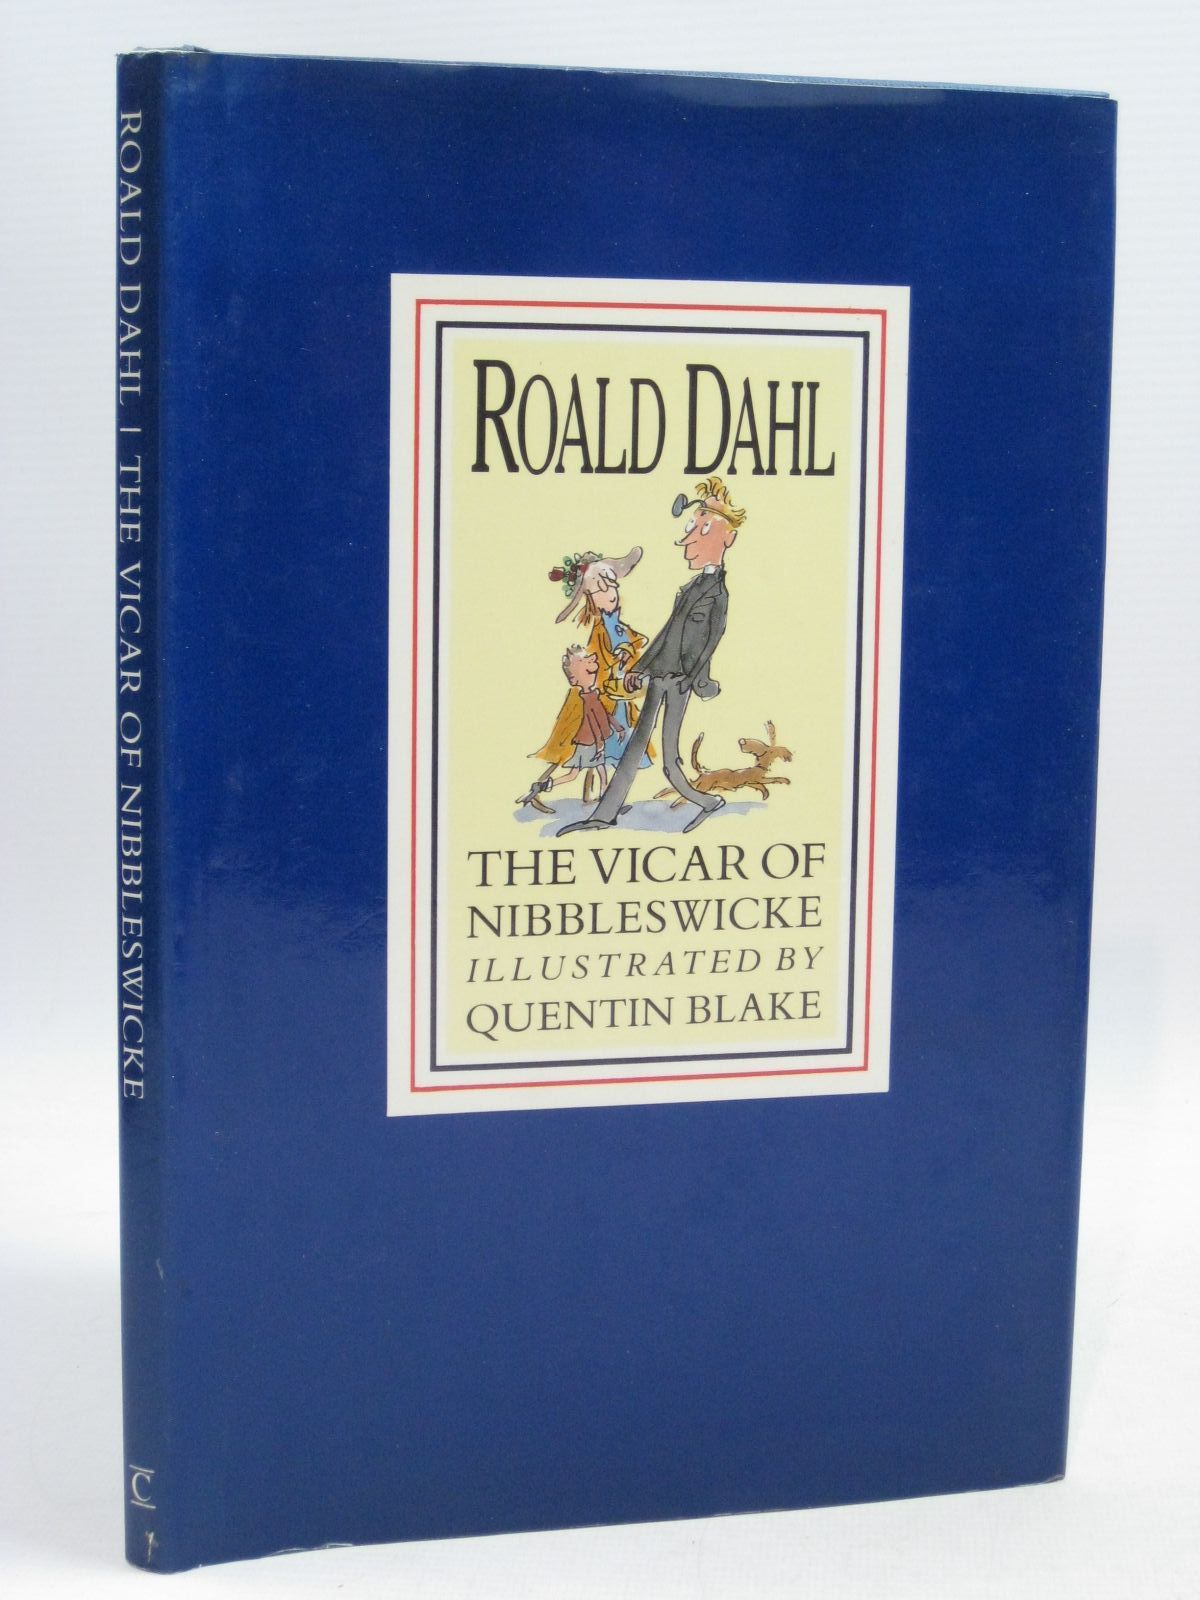 Photo of THE VICAR OF NIBBLESWICKE written by Dahl, Roald illustrated by Blake, Quentin published by Century Publishing (STOCK CODE: 1505320)  for sale by Stella & Rose's Books